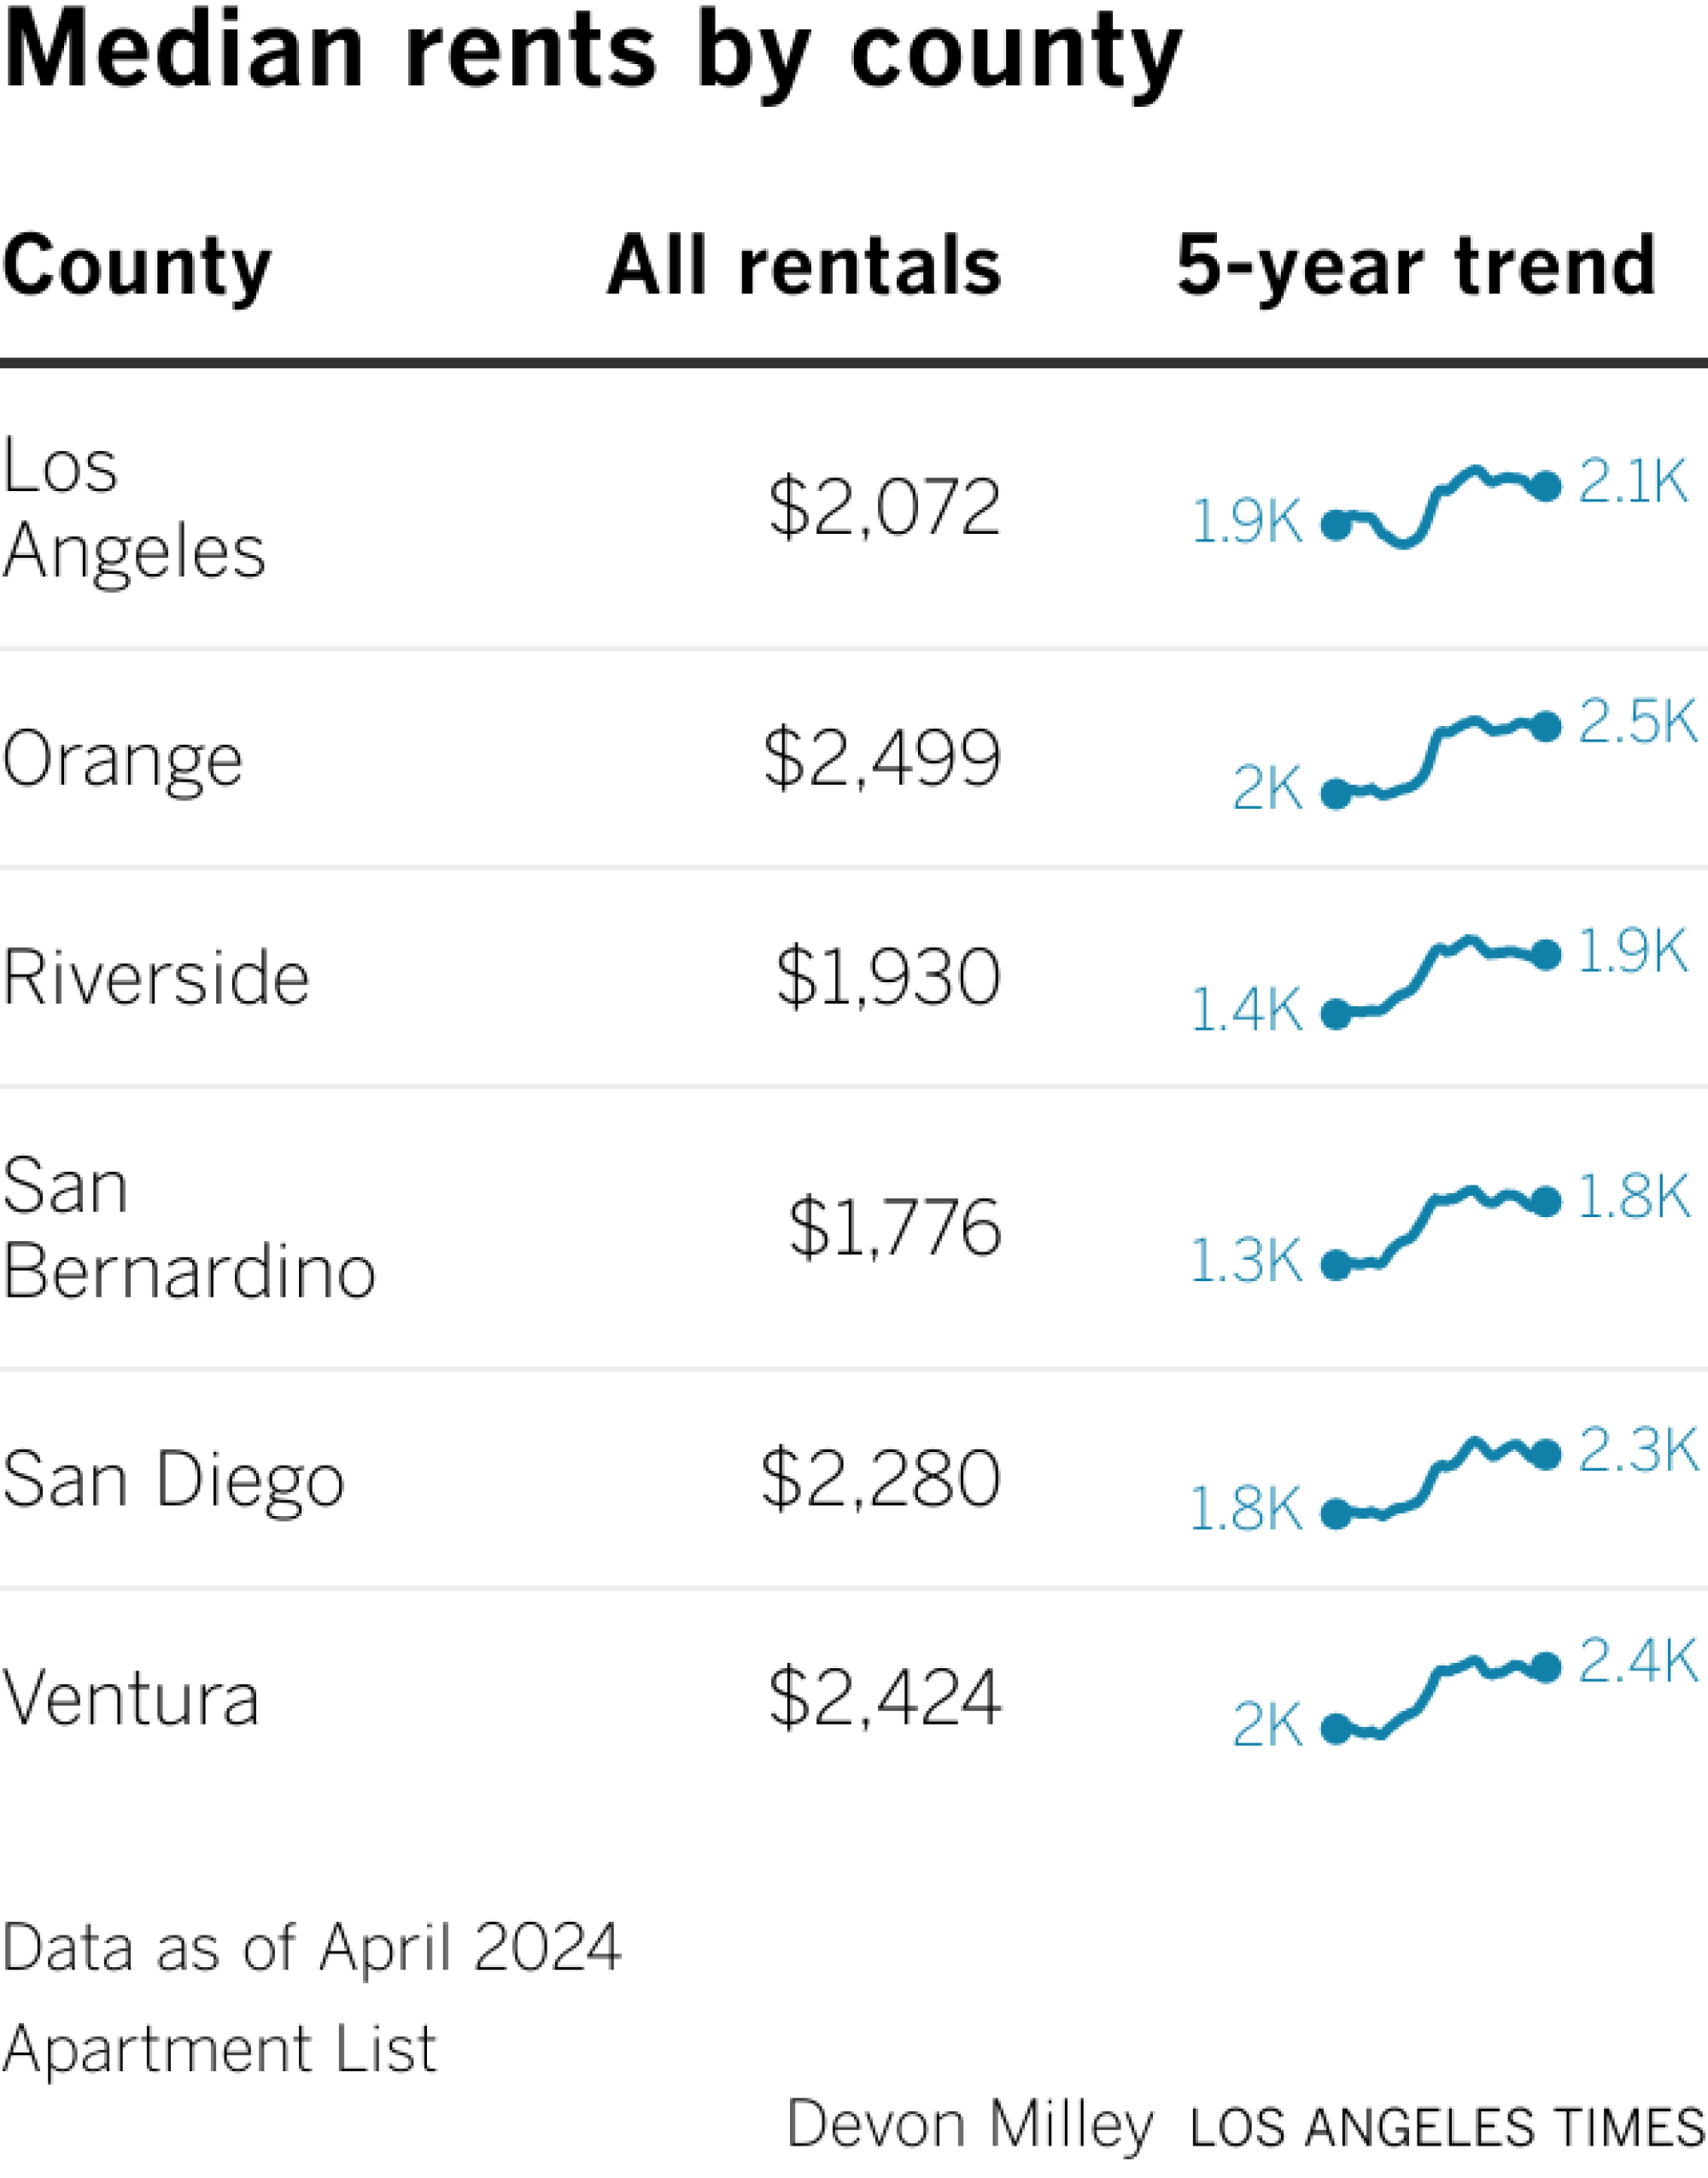 Table of apartment rental prices for six southern California counties